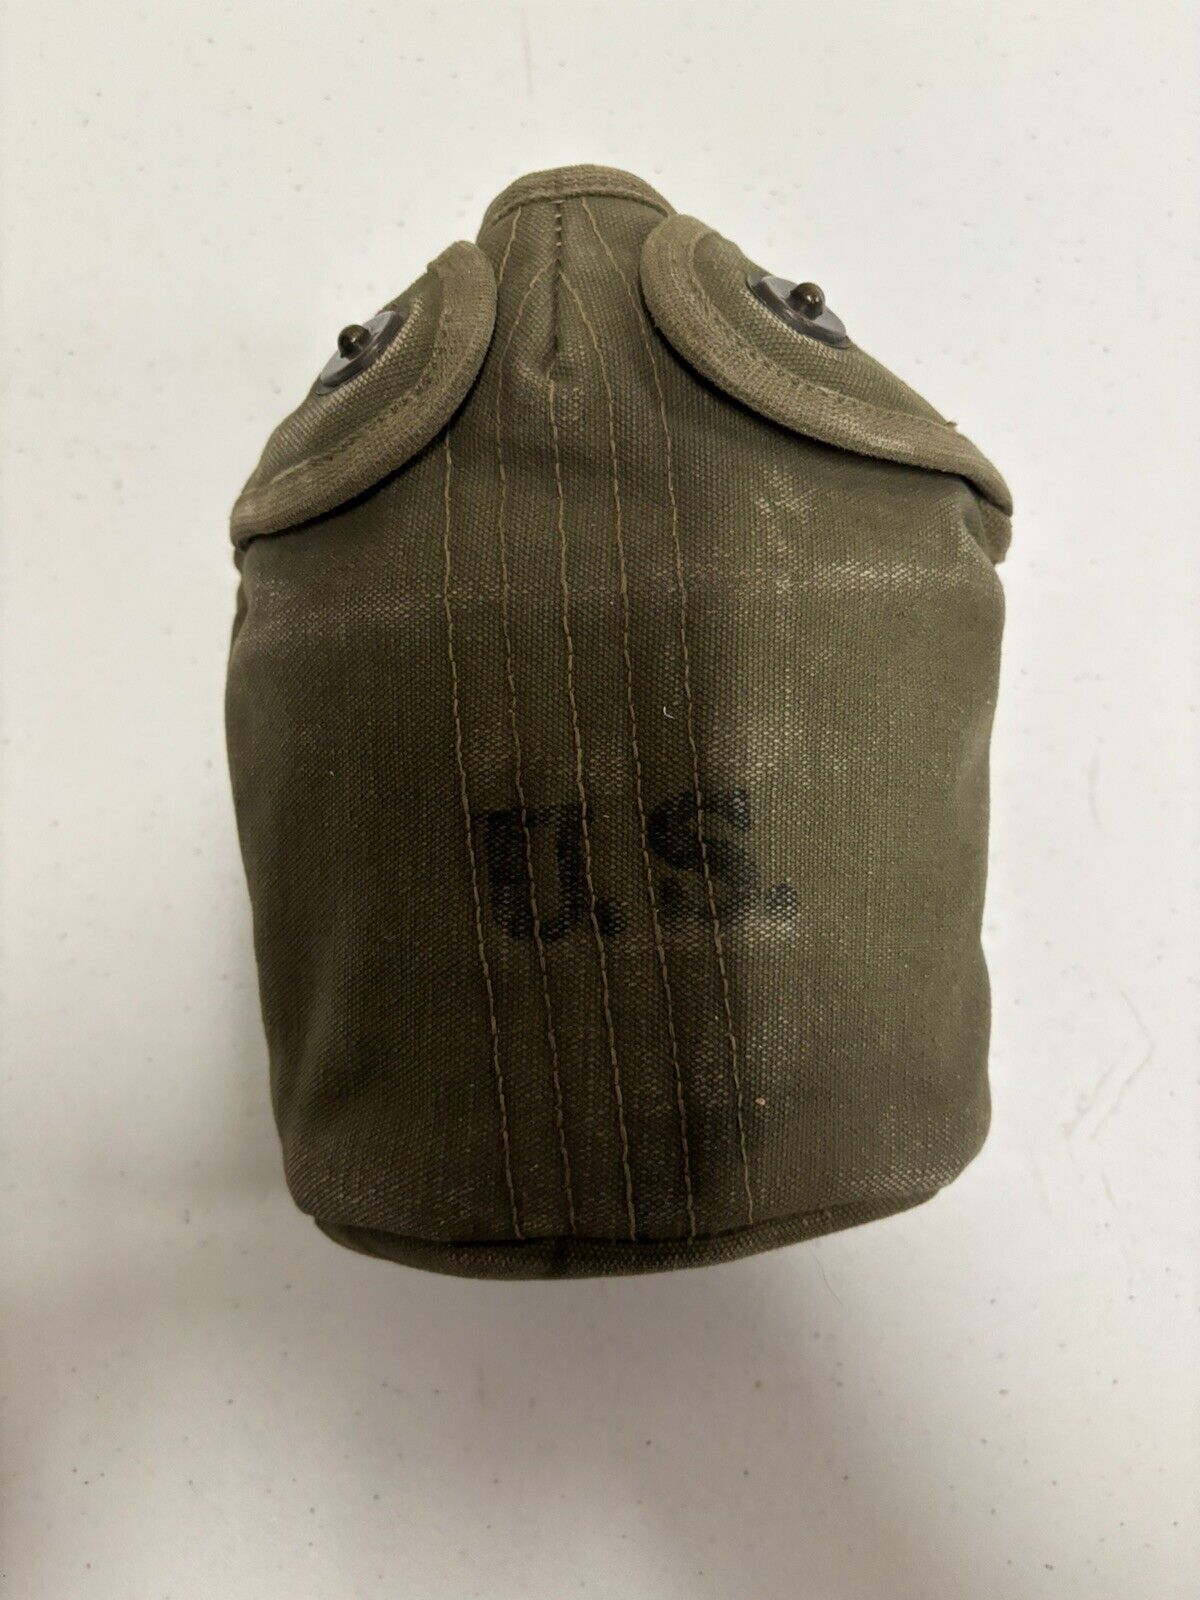 Vintage Set U.S. Military WW ll Canteen Insulated Cover Cup Belt Clip